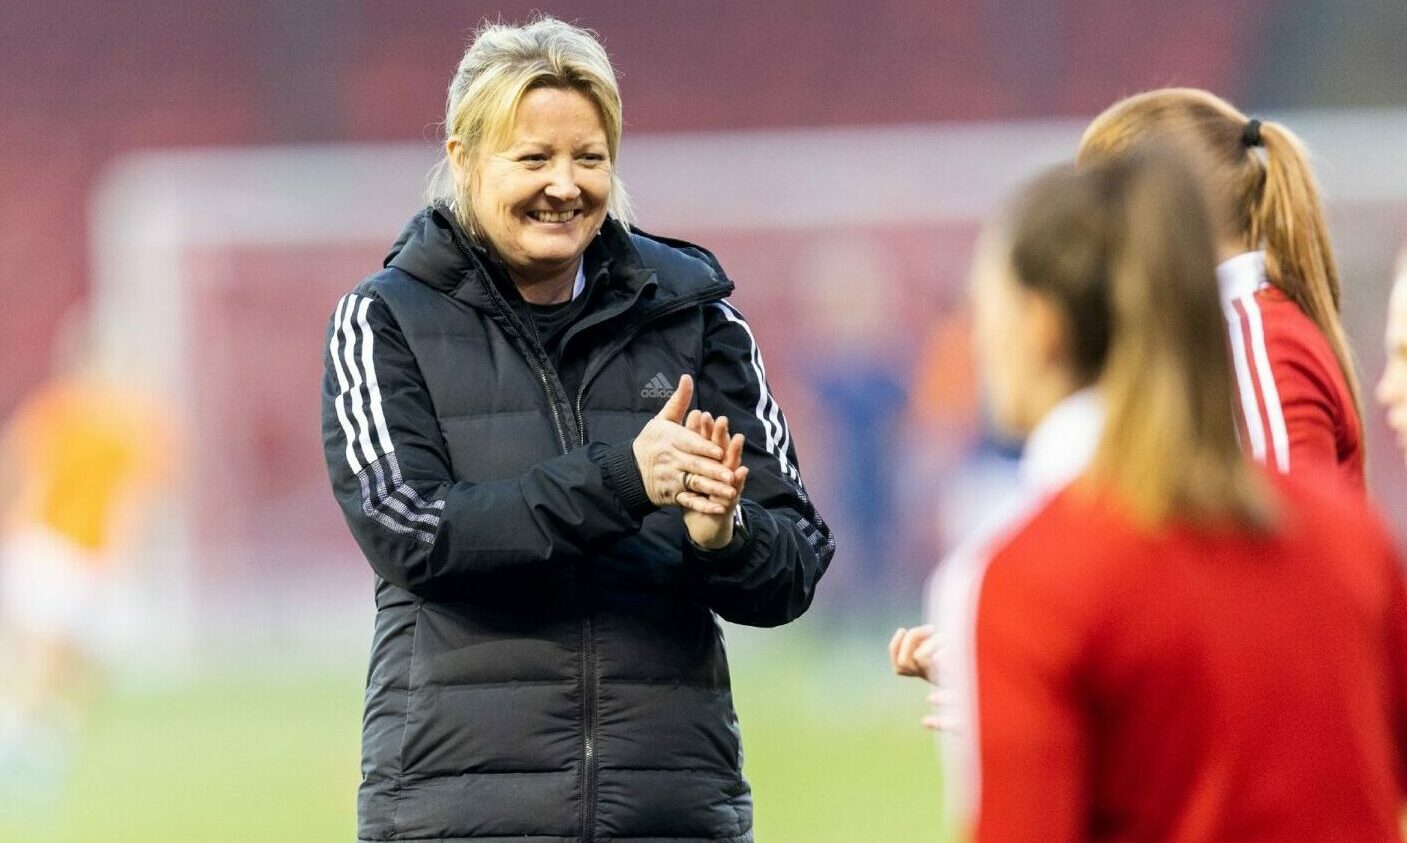 Aberdeen Women co-manager Emma Hunter smiling at her players.